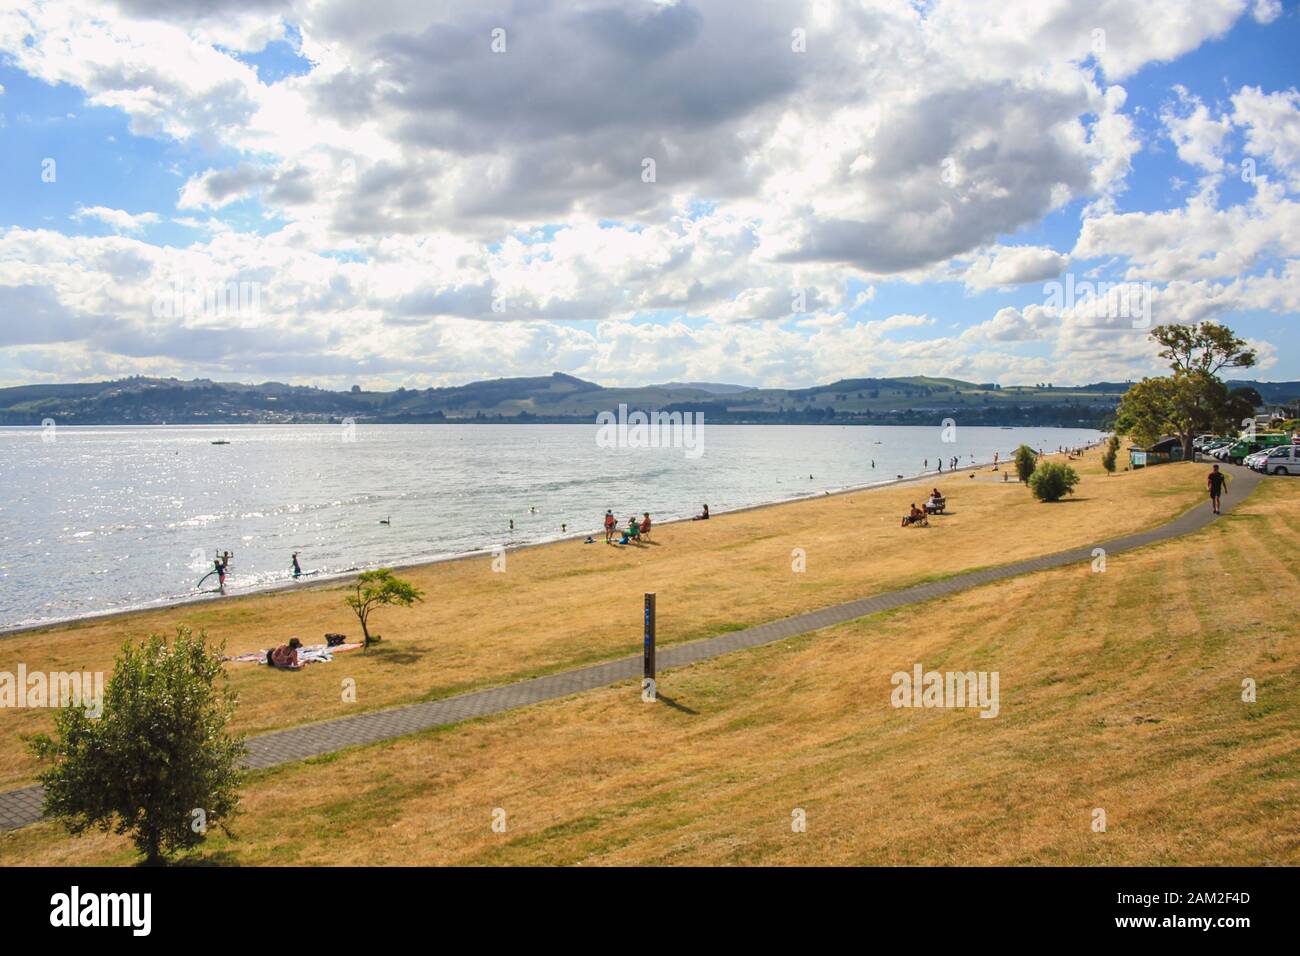 Taupo, North Island, New Zealand - December 21st 2016: Beautiful view over Lake Taupo. Taupo is a famous tourist spot with a lot of things to do. Stock Photo